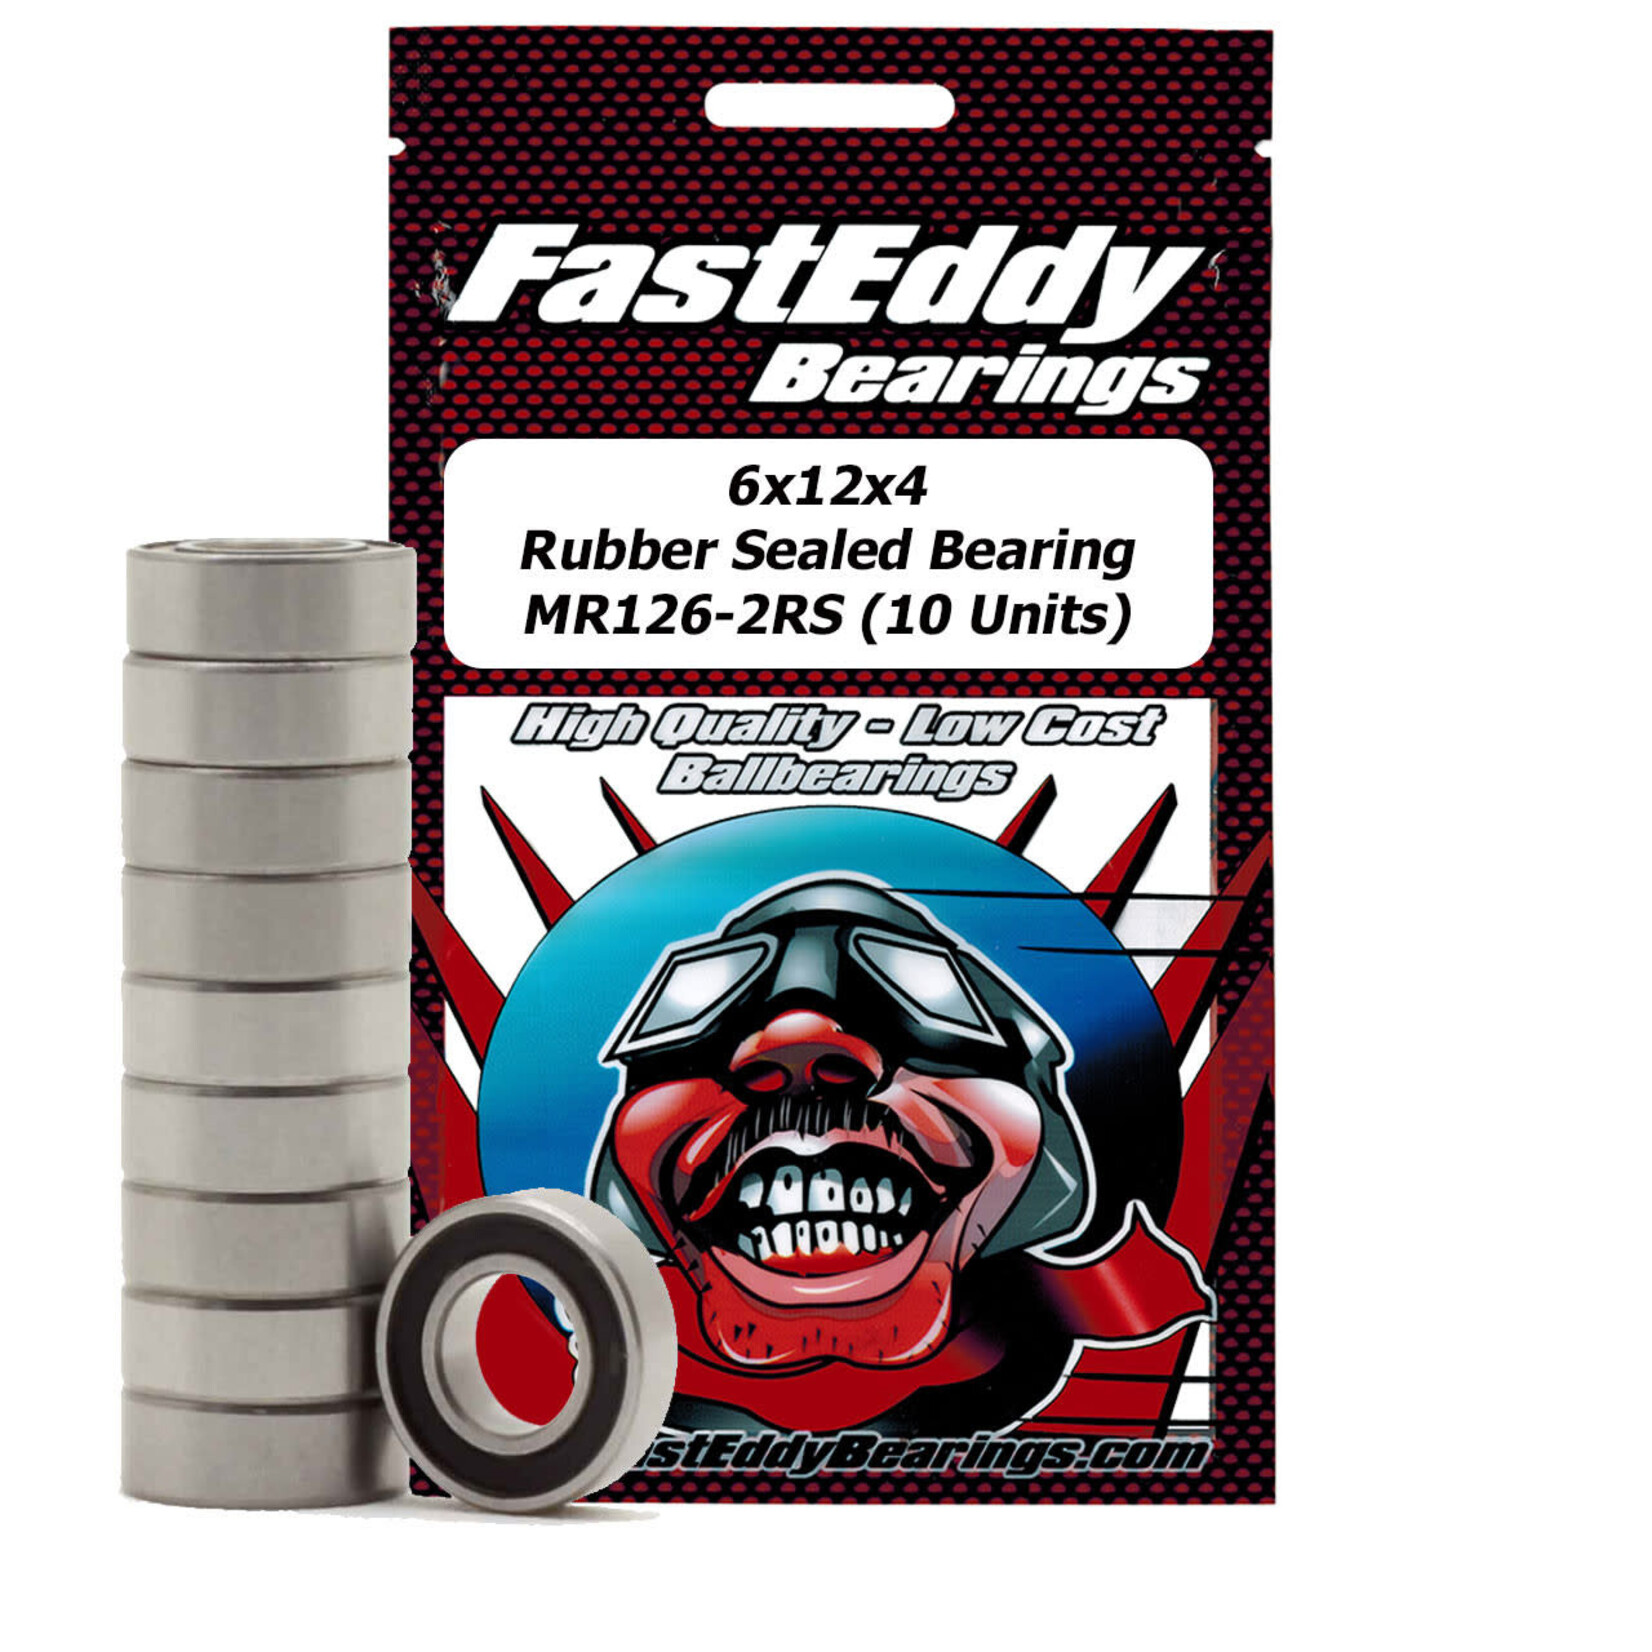 FastEddy FastEddy 6x12x4 Rubber Sealed Bearing MR126-2RS (1) #TFE272